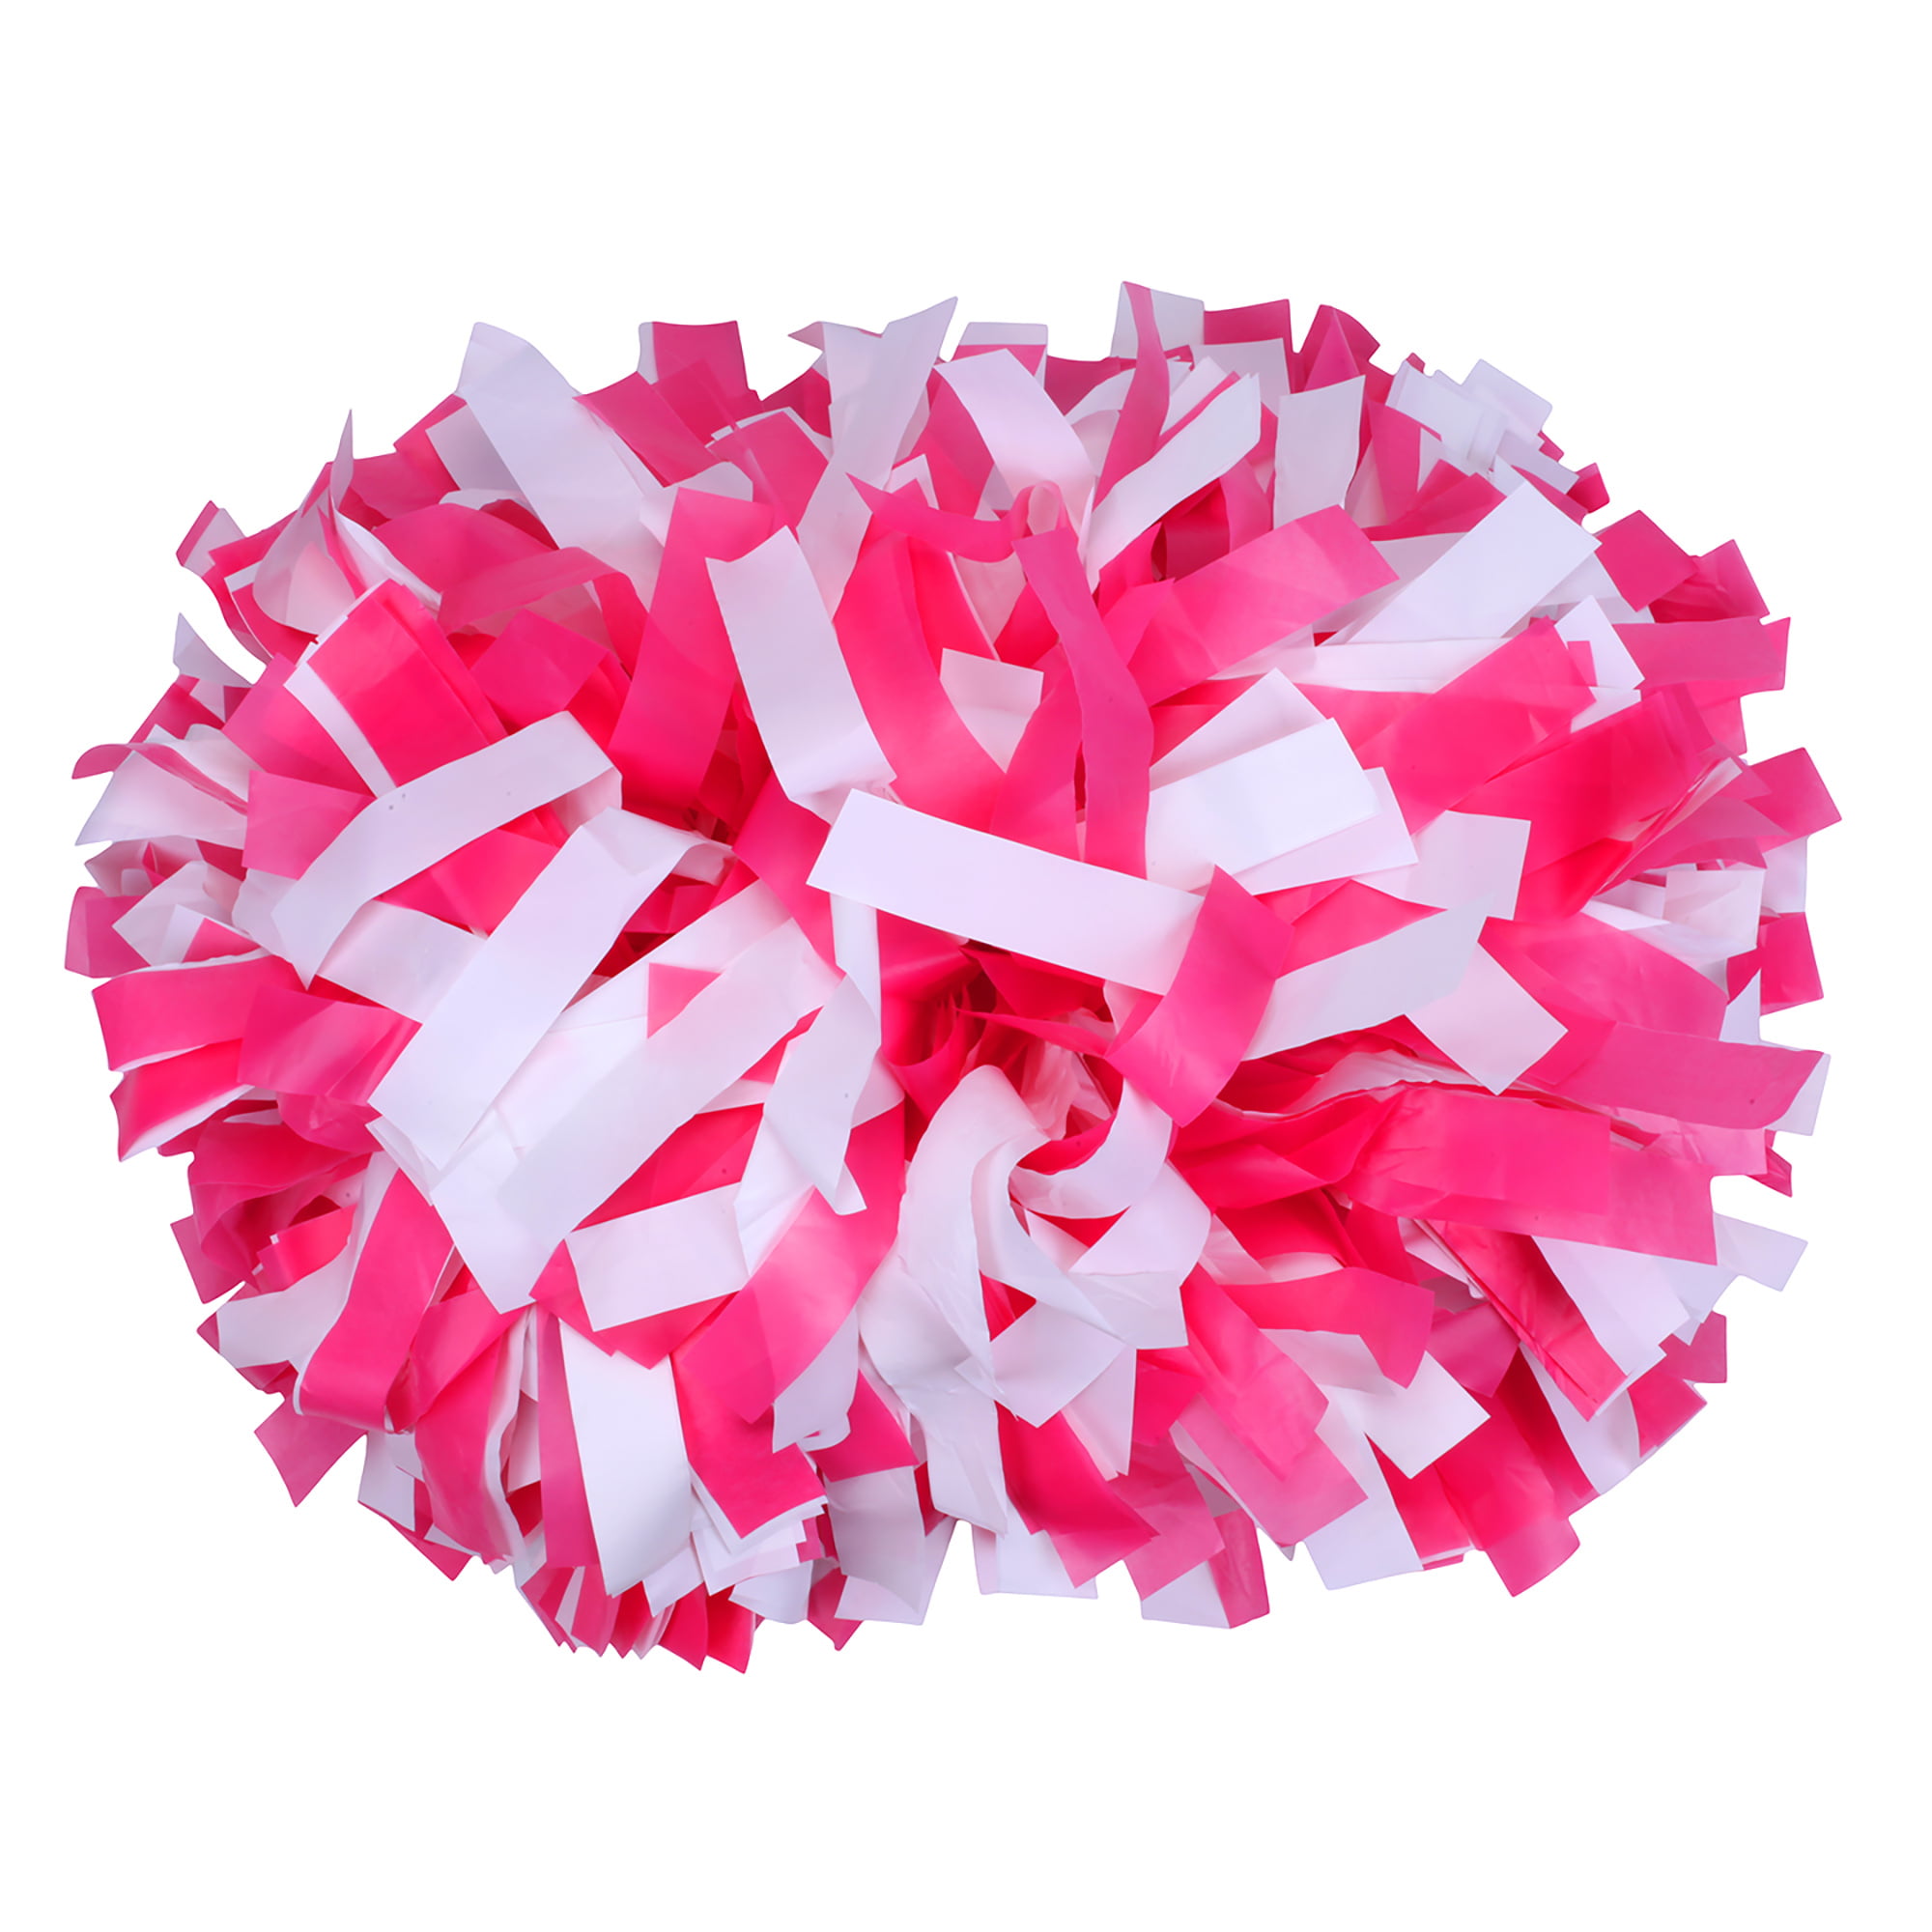 TEMKIN Pink Pom Poms 12pcs Cheerleaders Bouquet Pink Pom Poms Cheering Tool  Metallic Pom Poms Cheerleading Poms Clothing Pompom Decorate Props Pink